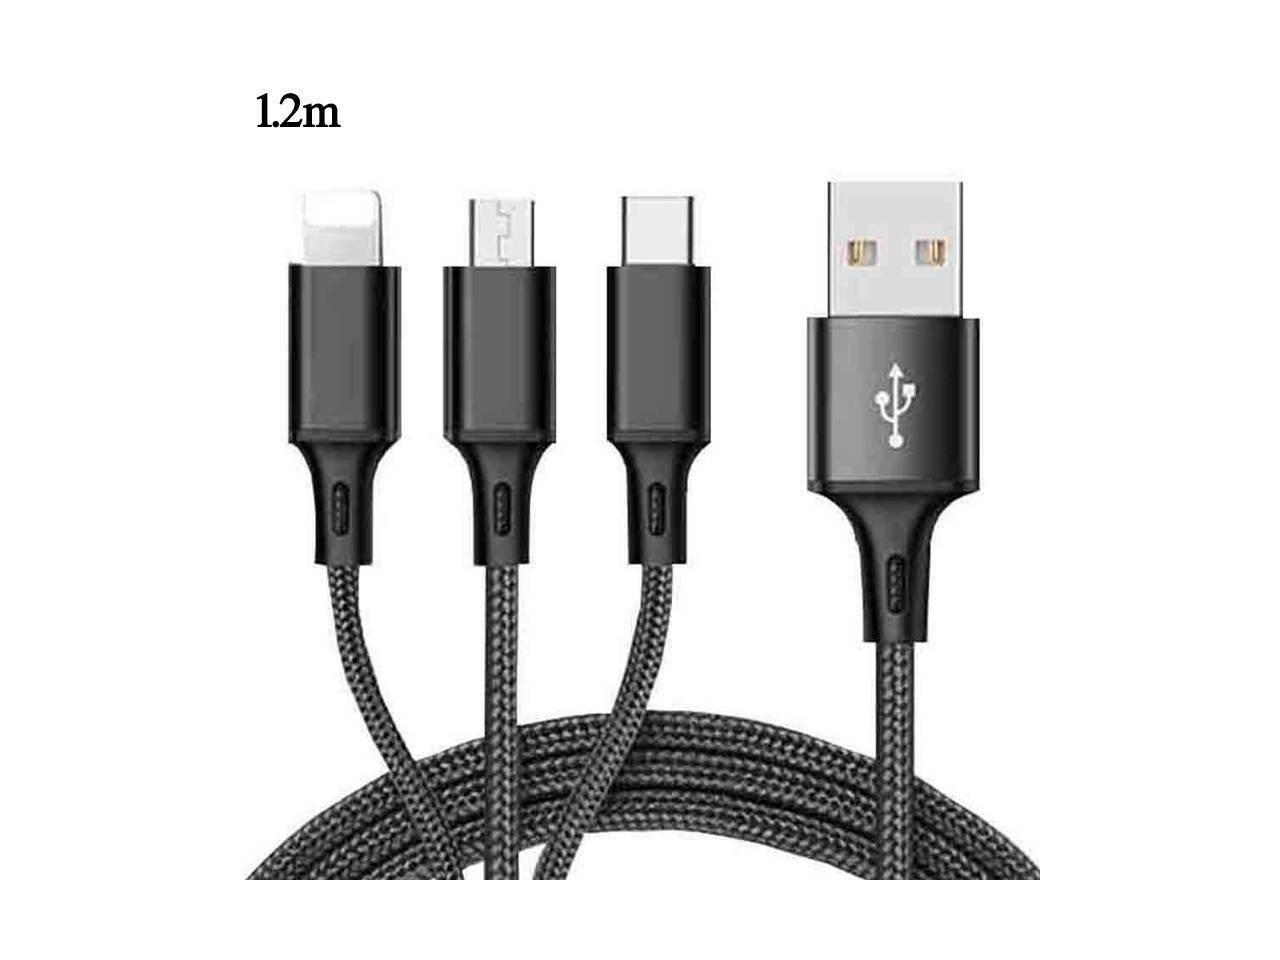 WXDGLL WWE Multi-Charging Cable 3-in-1 Fast Charging Cable Connector and Dual Phone Port Adapter Compatible with Fast Flash Charging of Tablet Phones